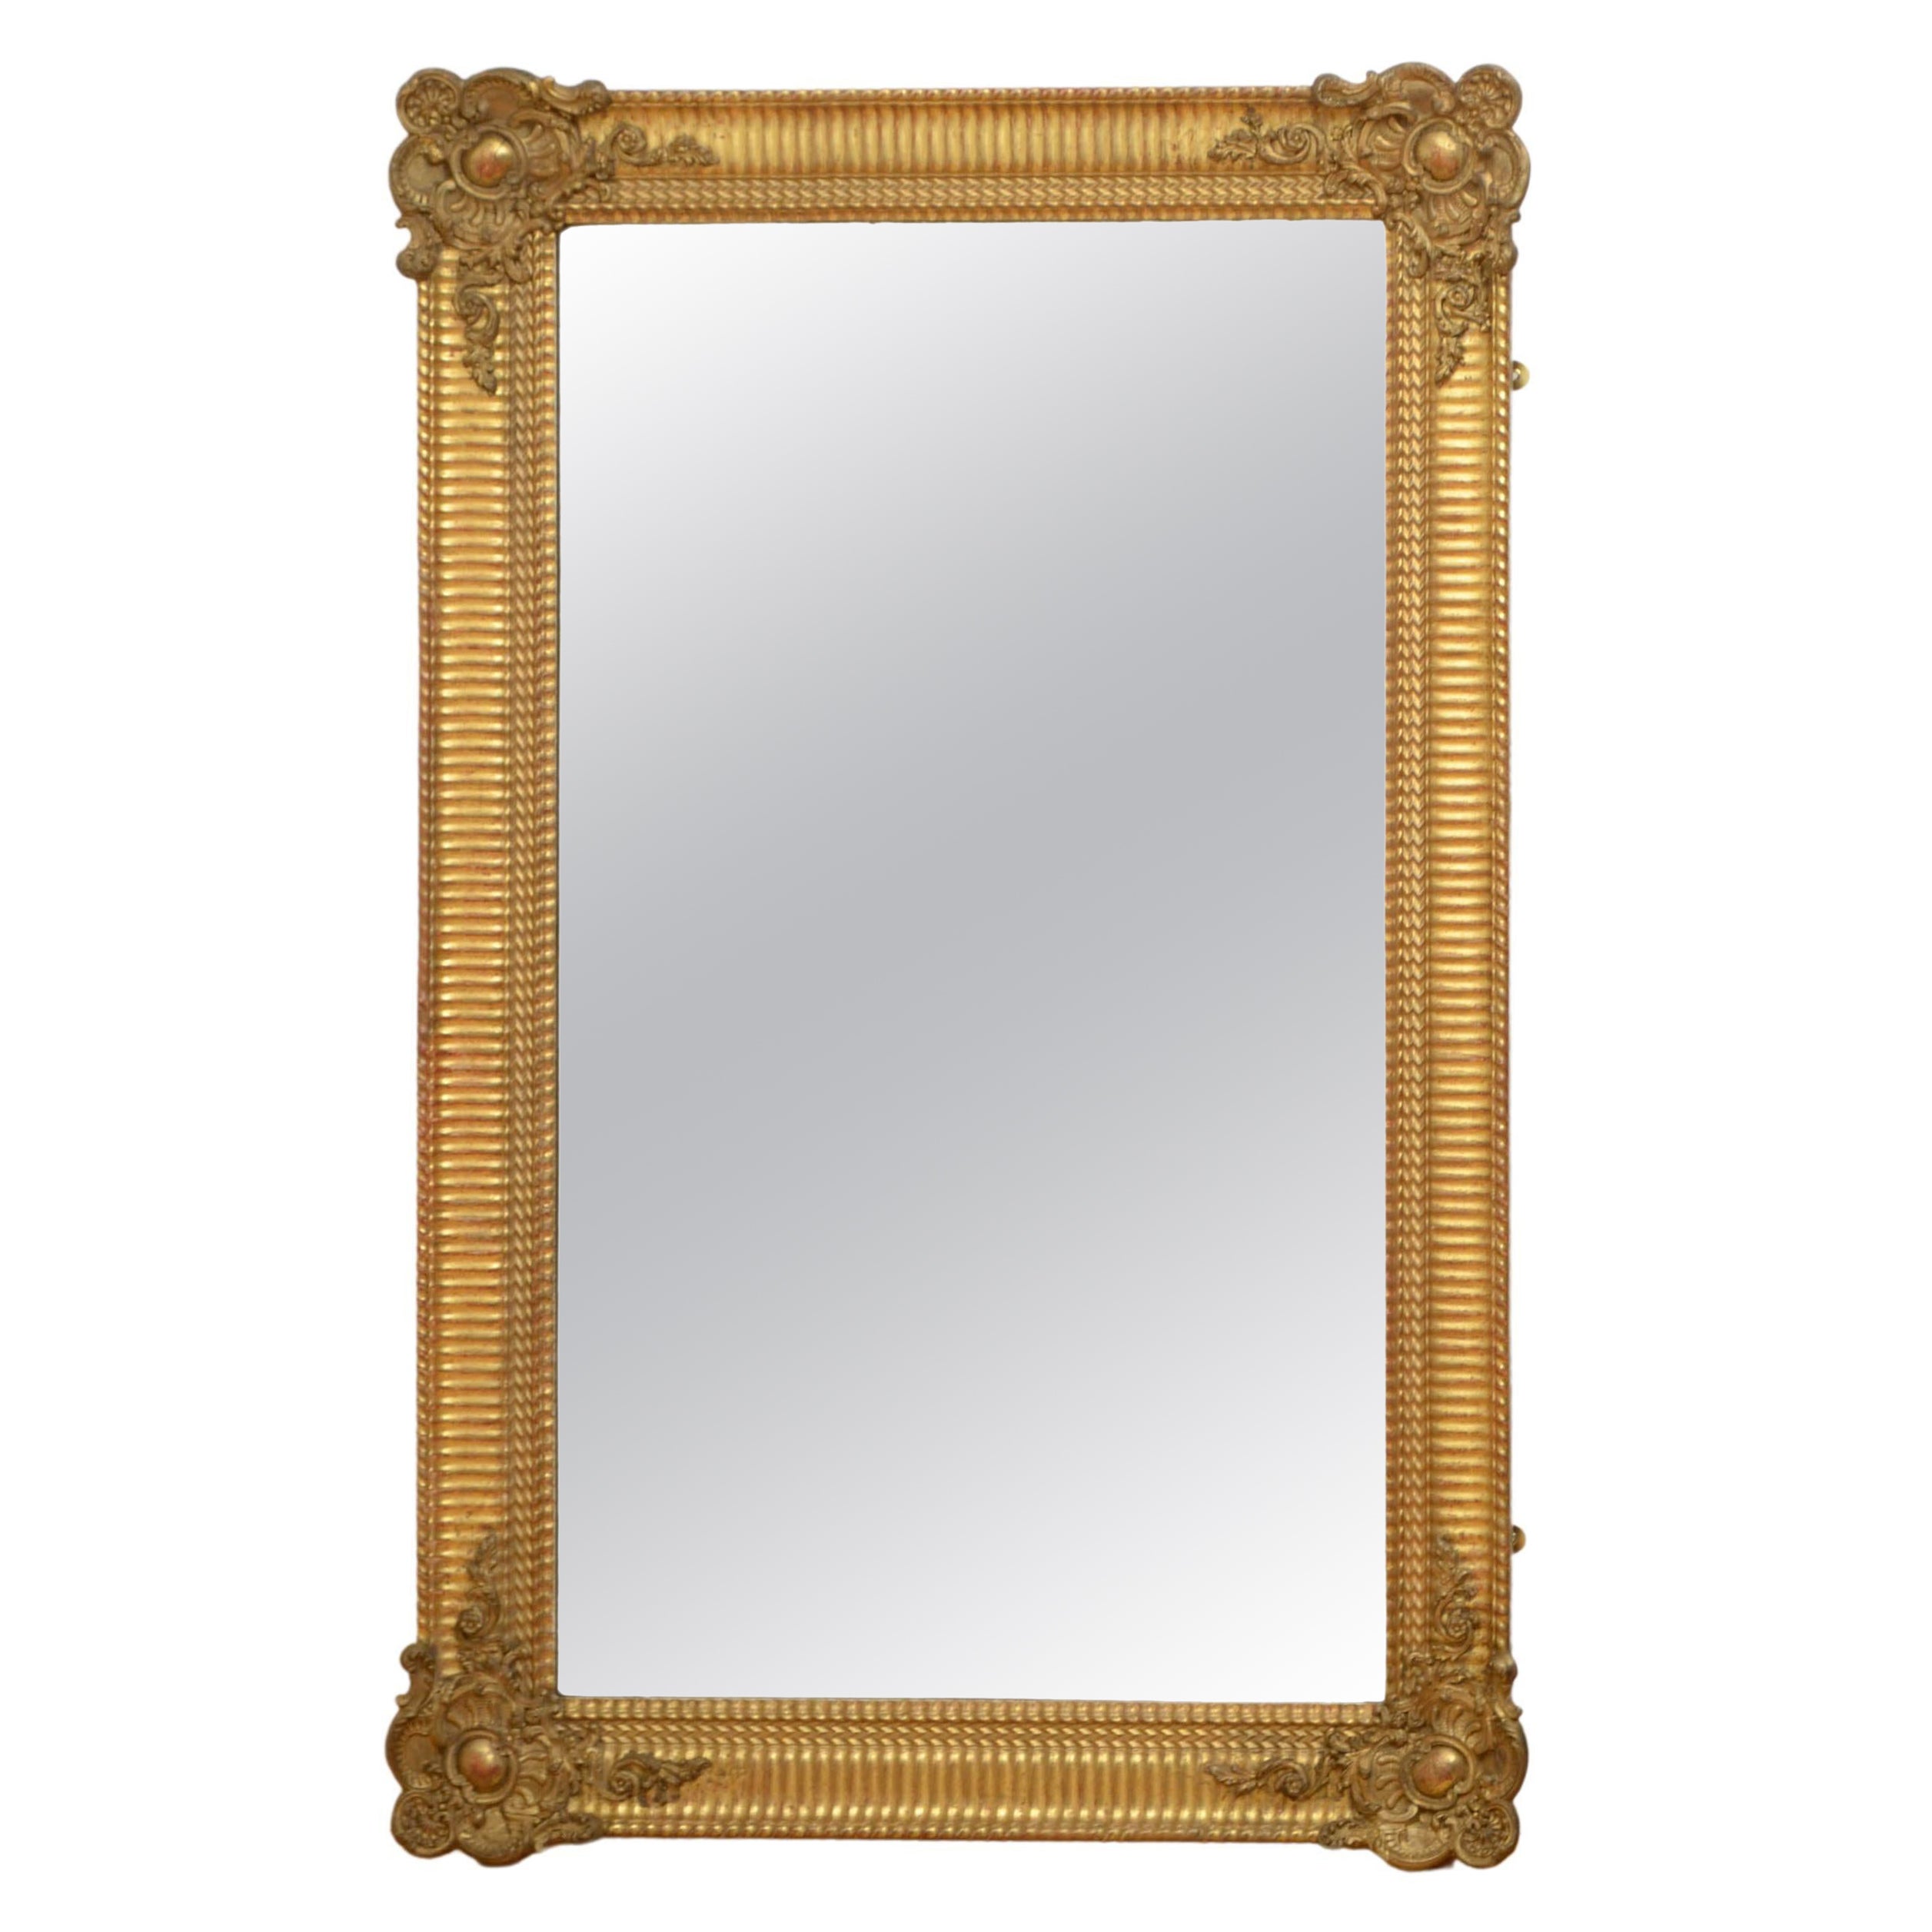 Early 19th Century Giltwood Wall Mirror